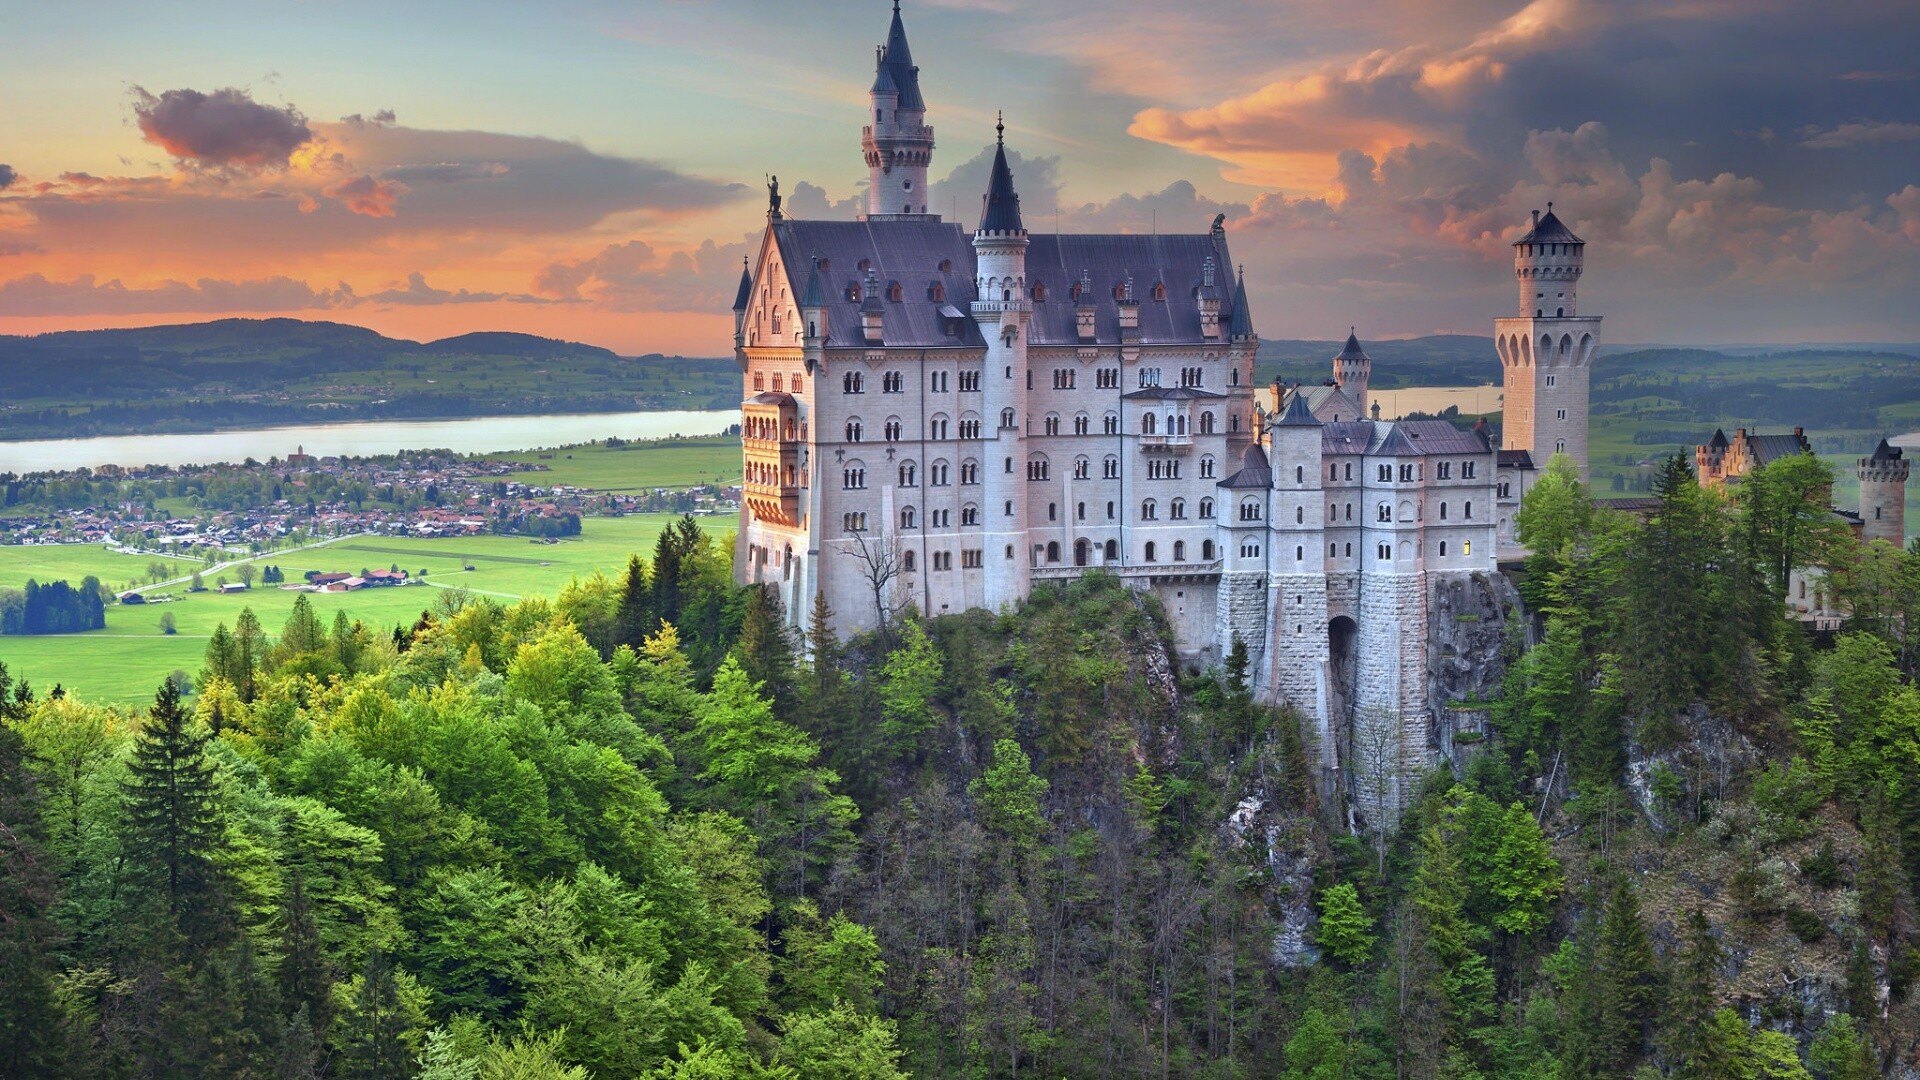 Neuschwanstein Castle: One of Germany's most visited sites, Fairy tale palace. 1920x1080 Full HD Wallpaper.